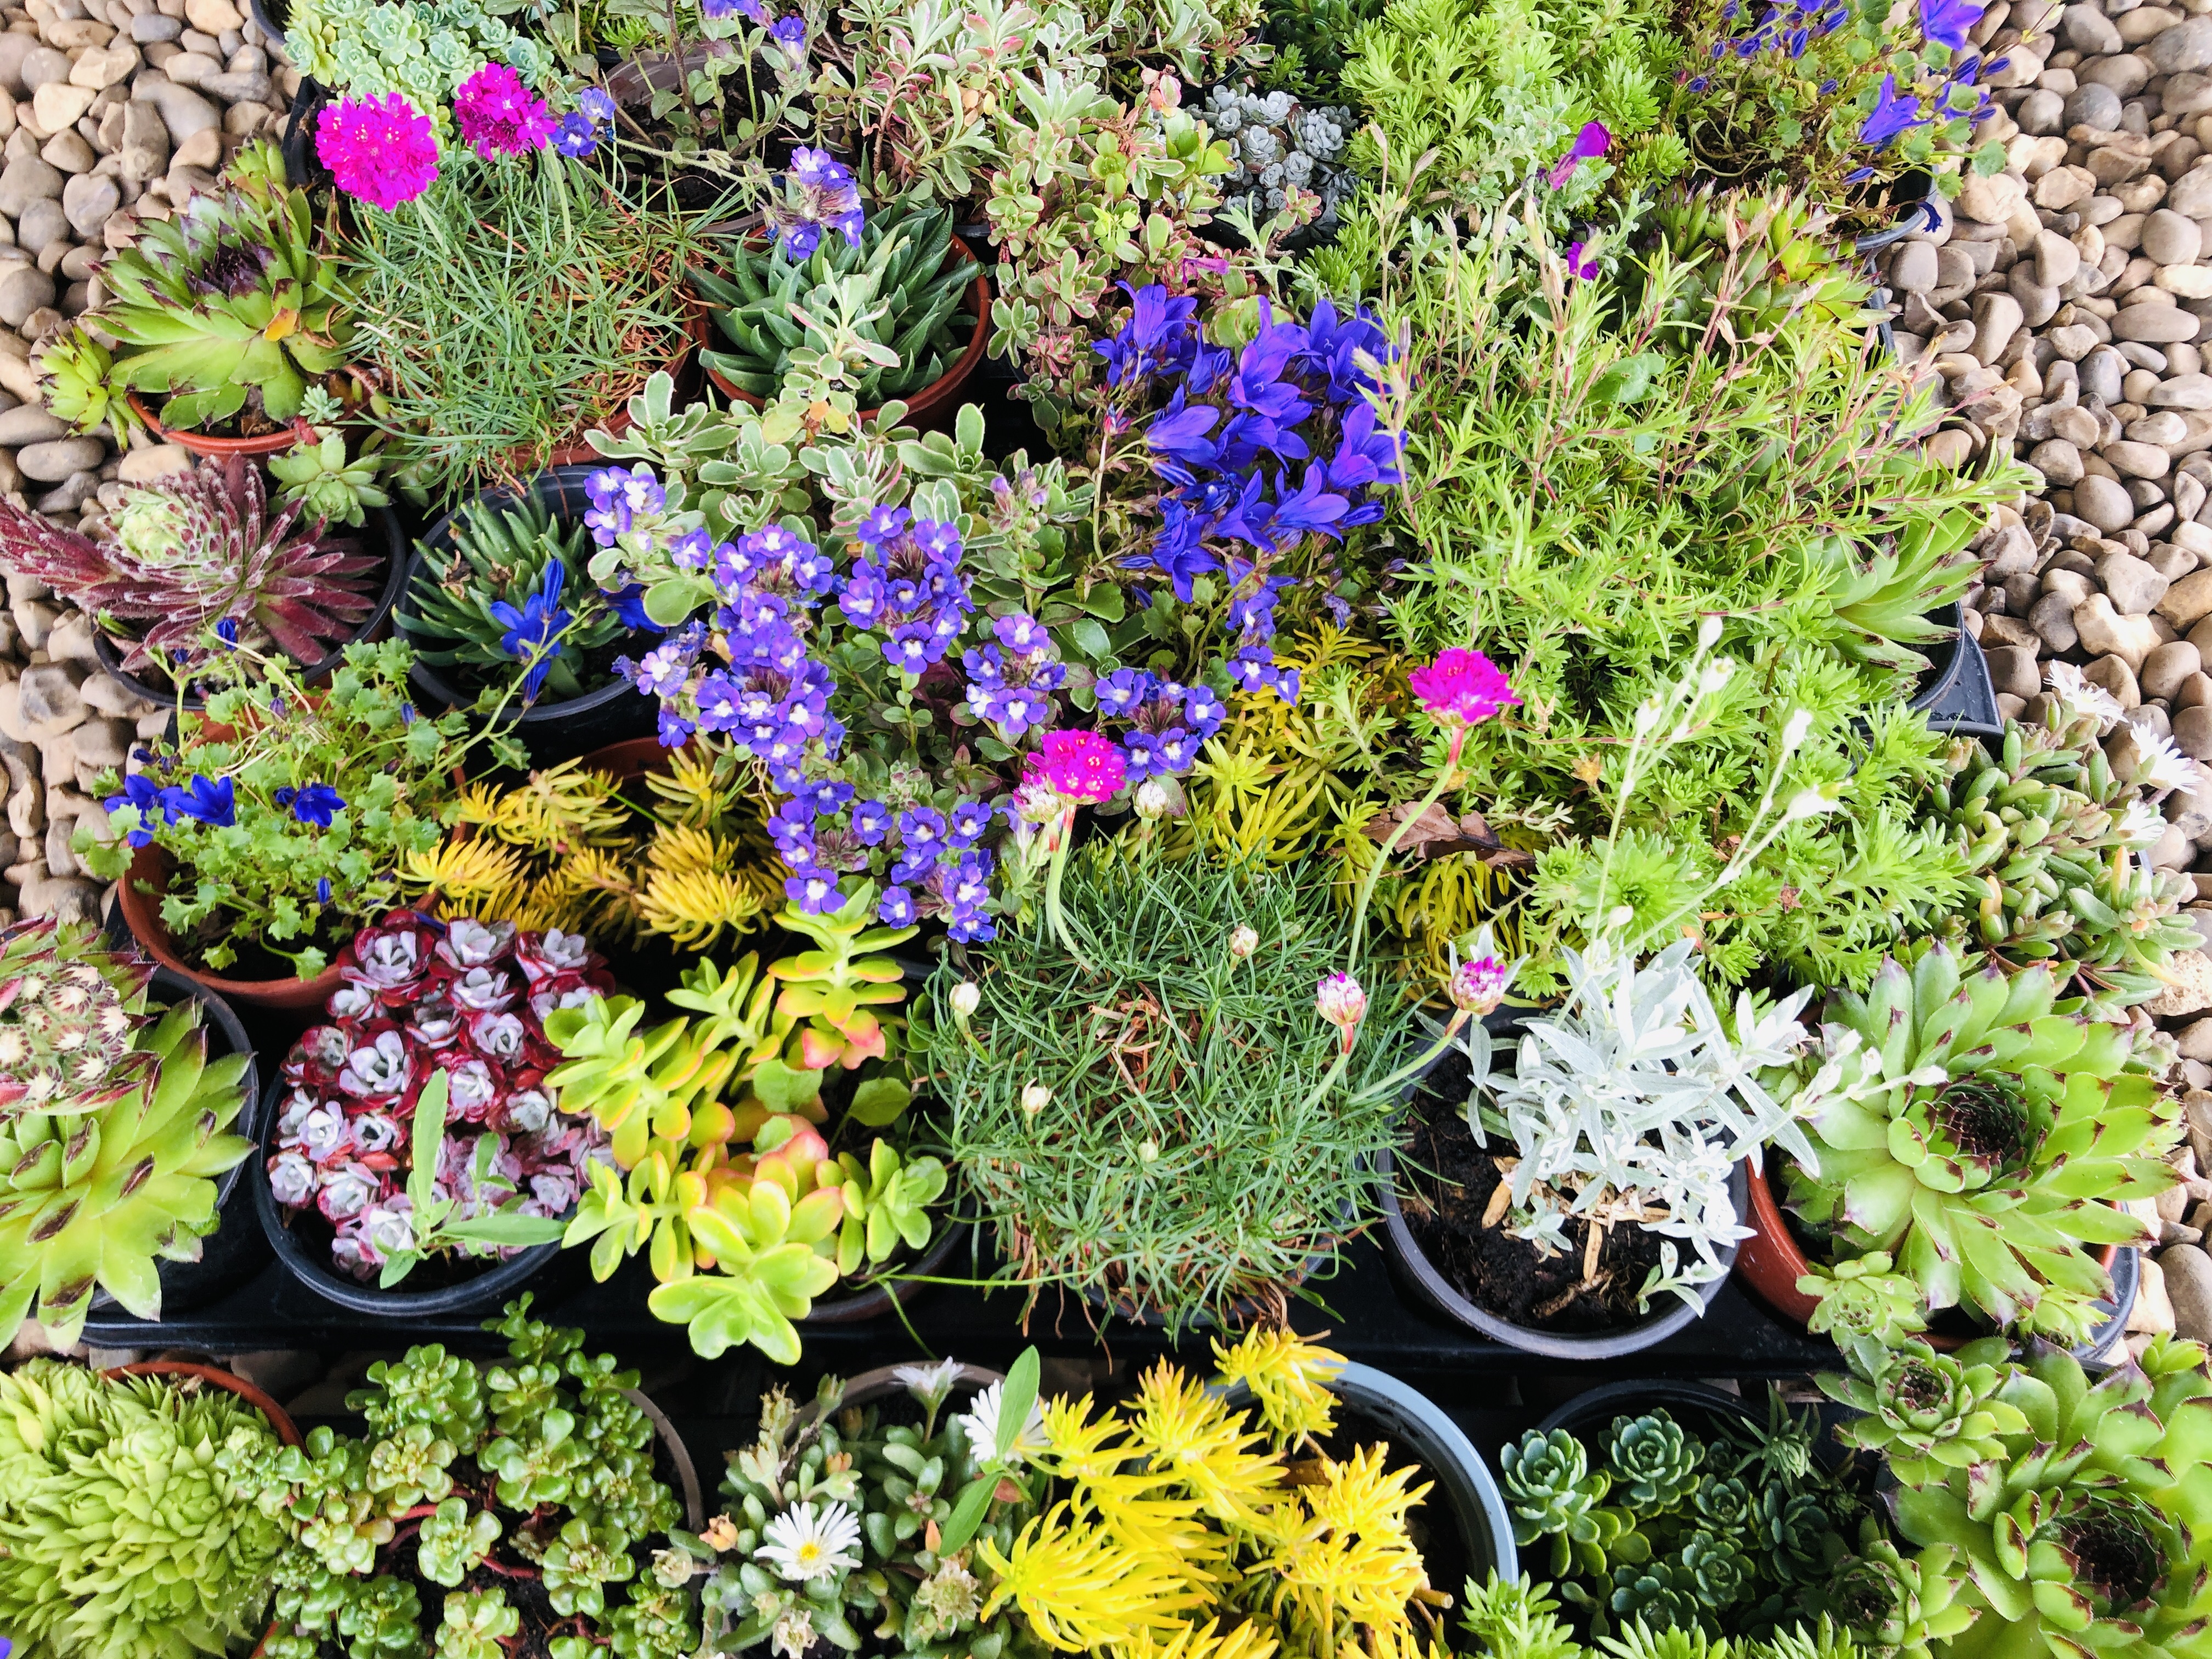 THREE TRAYS CONTAINING 18 POTTED ALPINE AND ROCKERY PLANTS. - Image 3 of 3